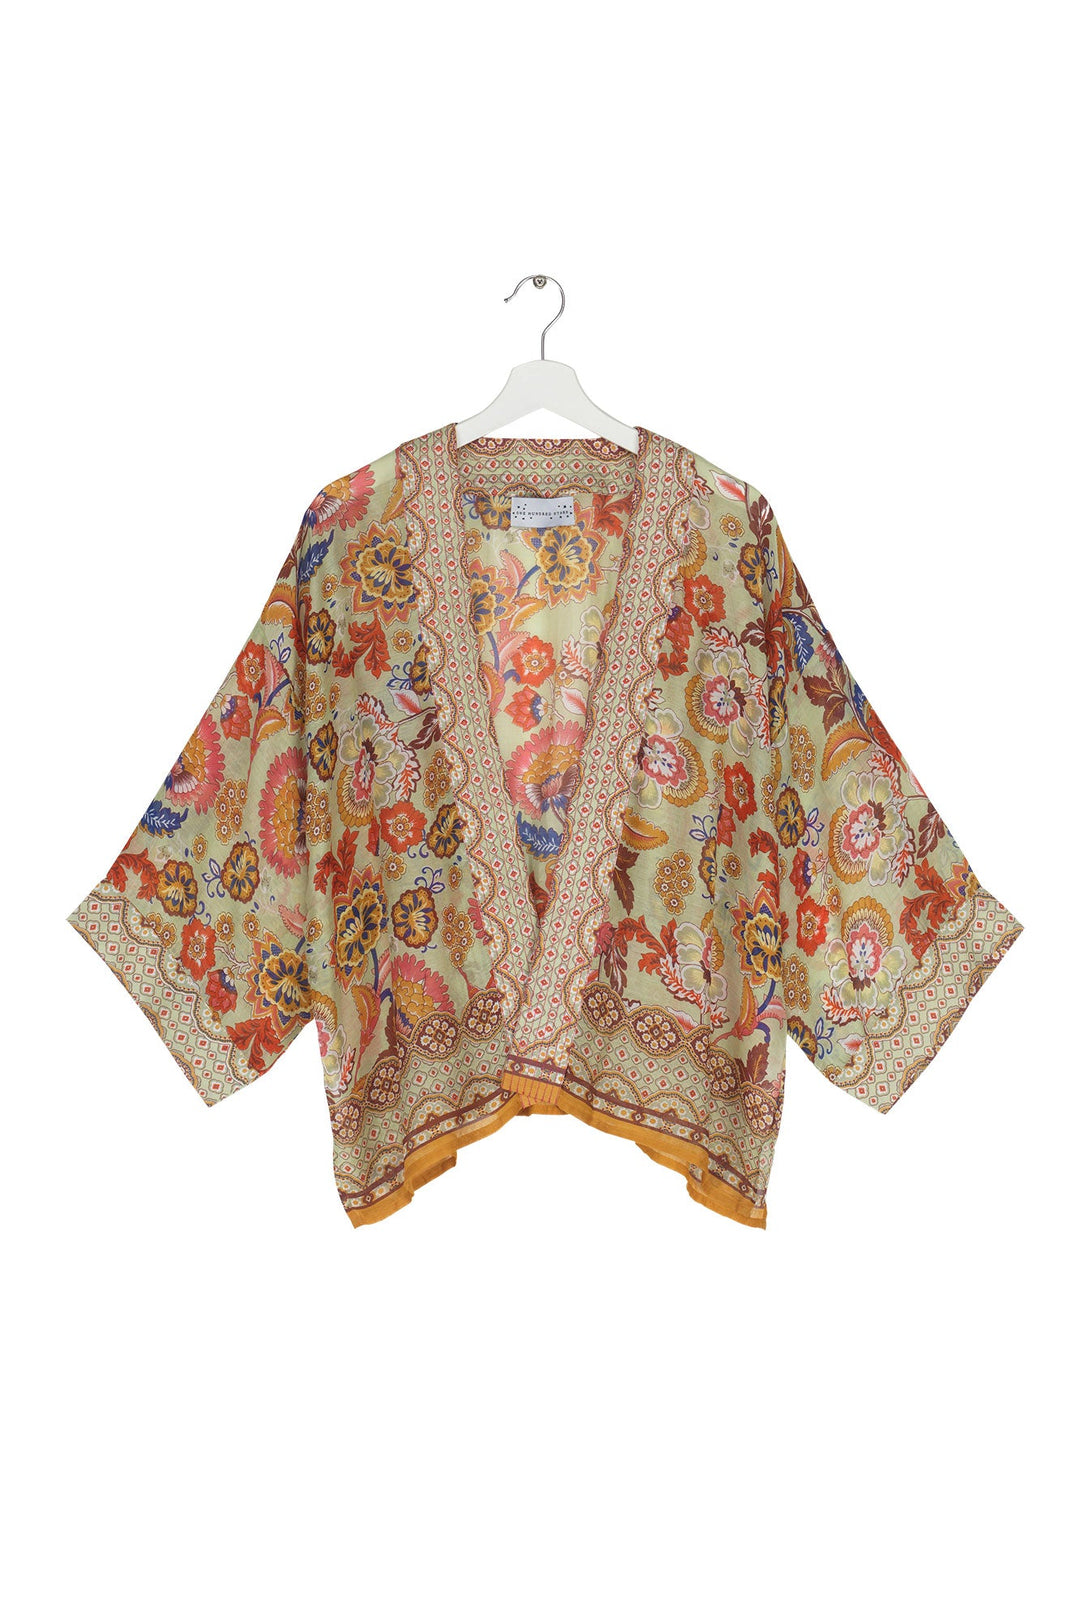 Women's short kimono  in taupe with Indian flower floral print by One Hundred Stars 